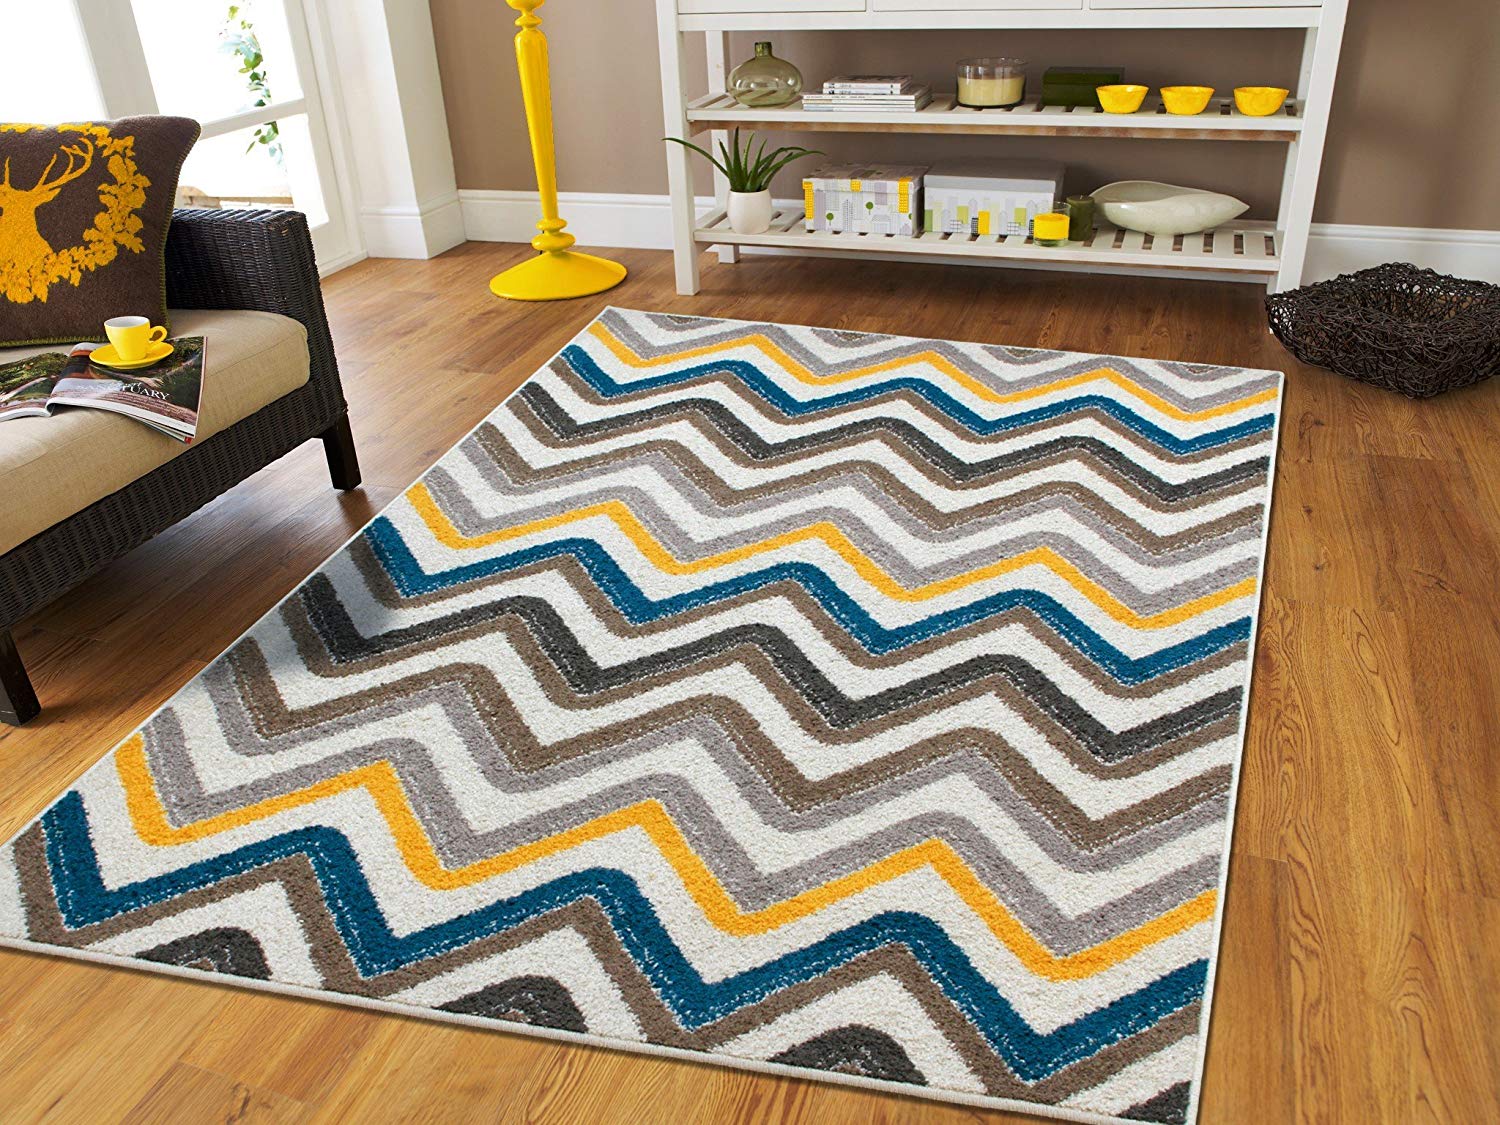 Clearance area rugs amazon.com: new fashion zigzag style large area rugs 8x11 clearance under  100 EELWZXX